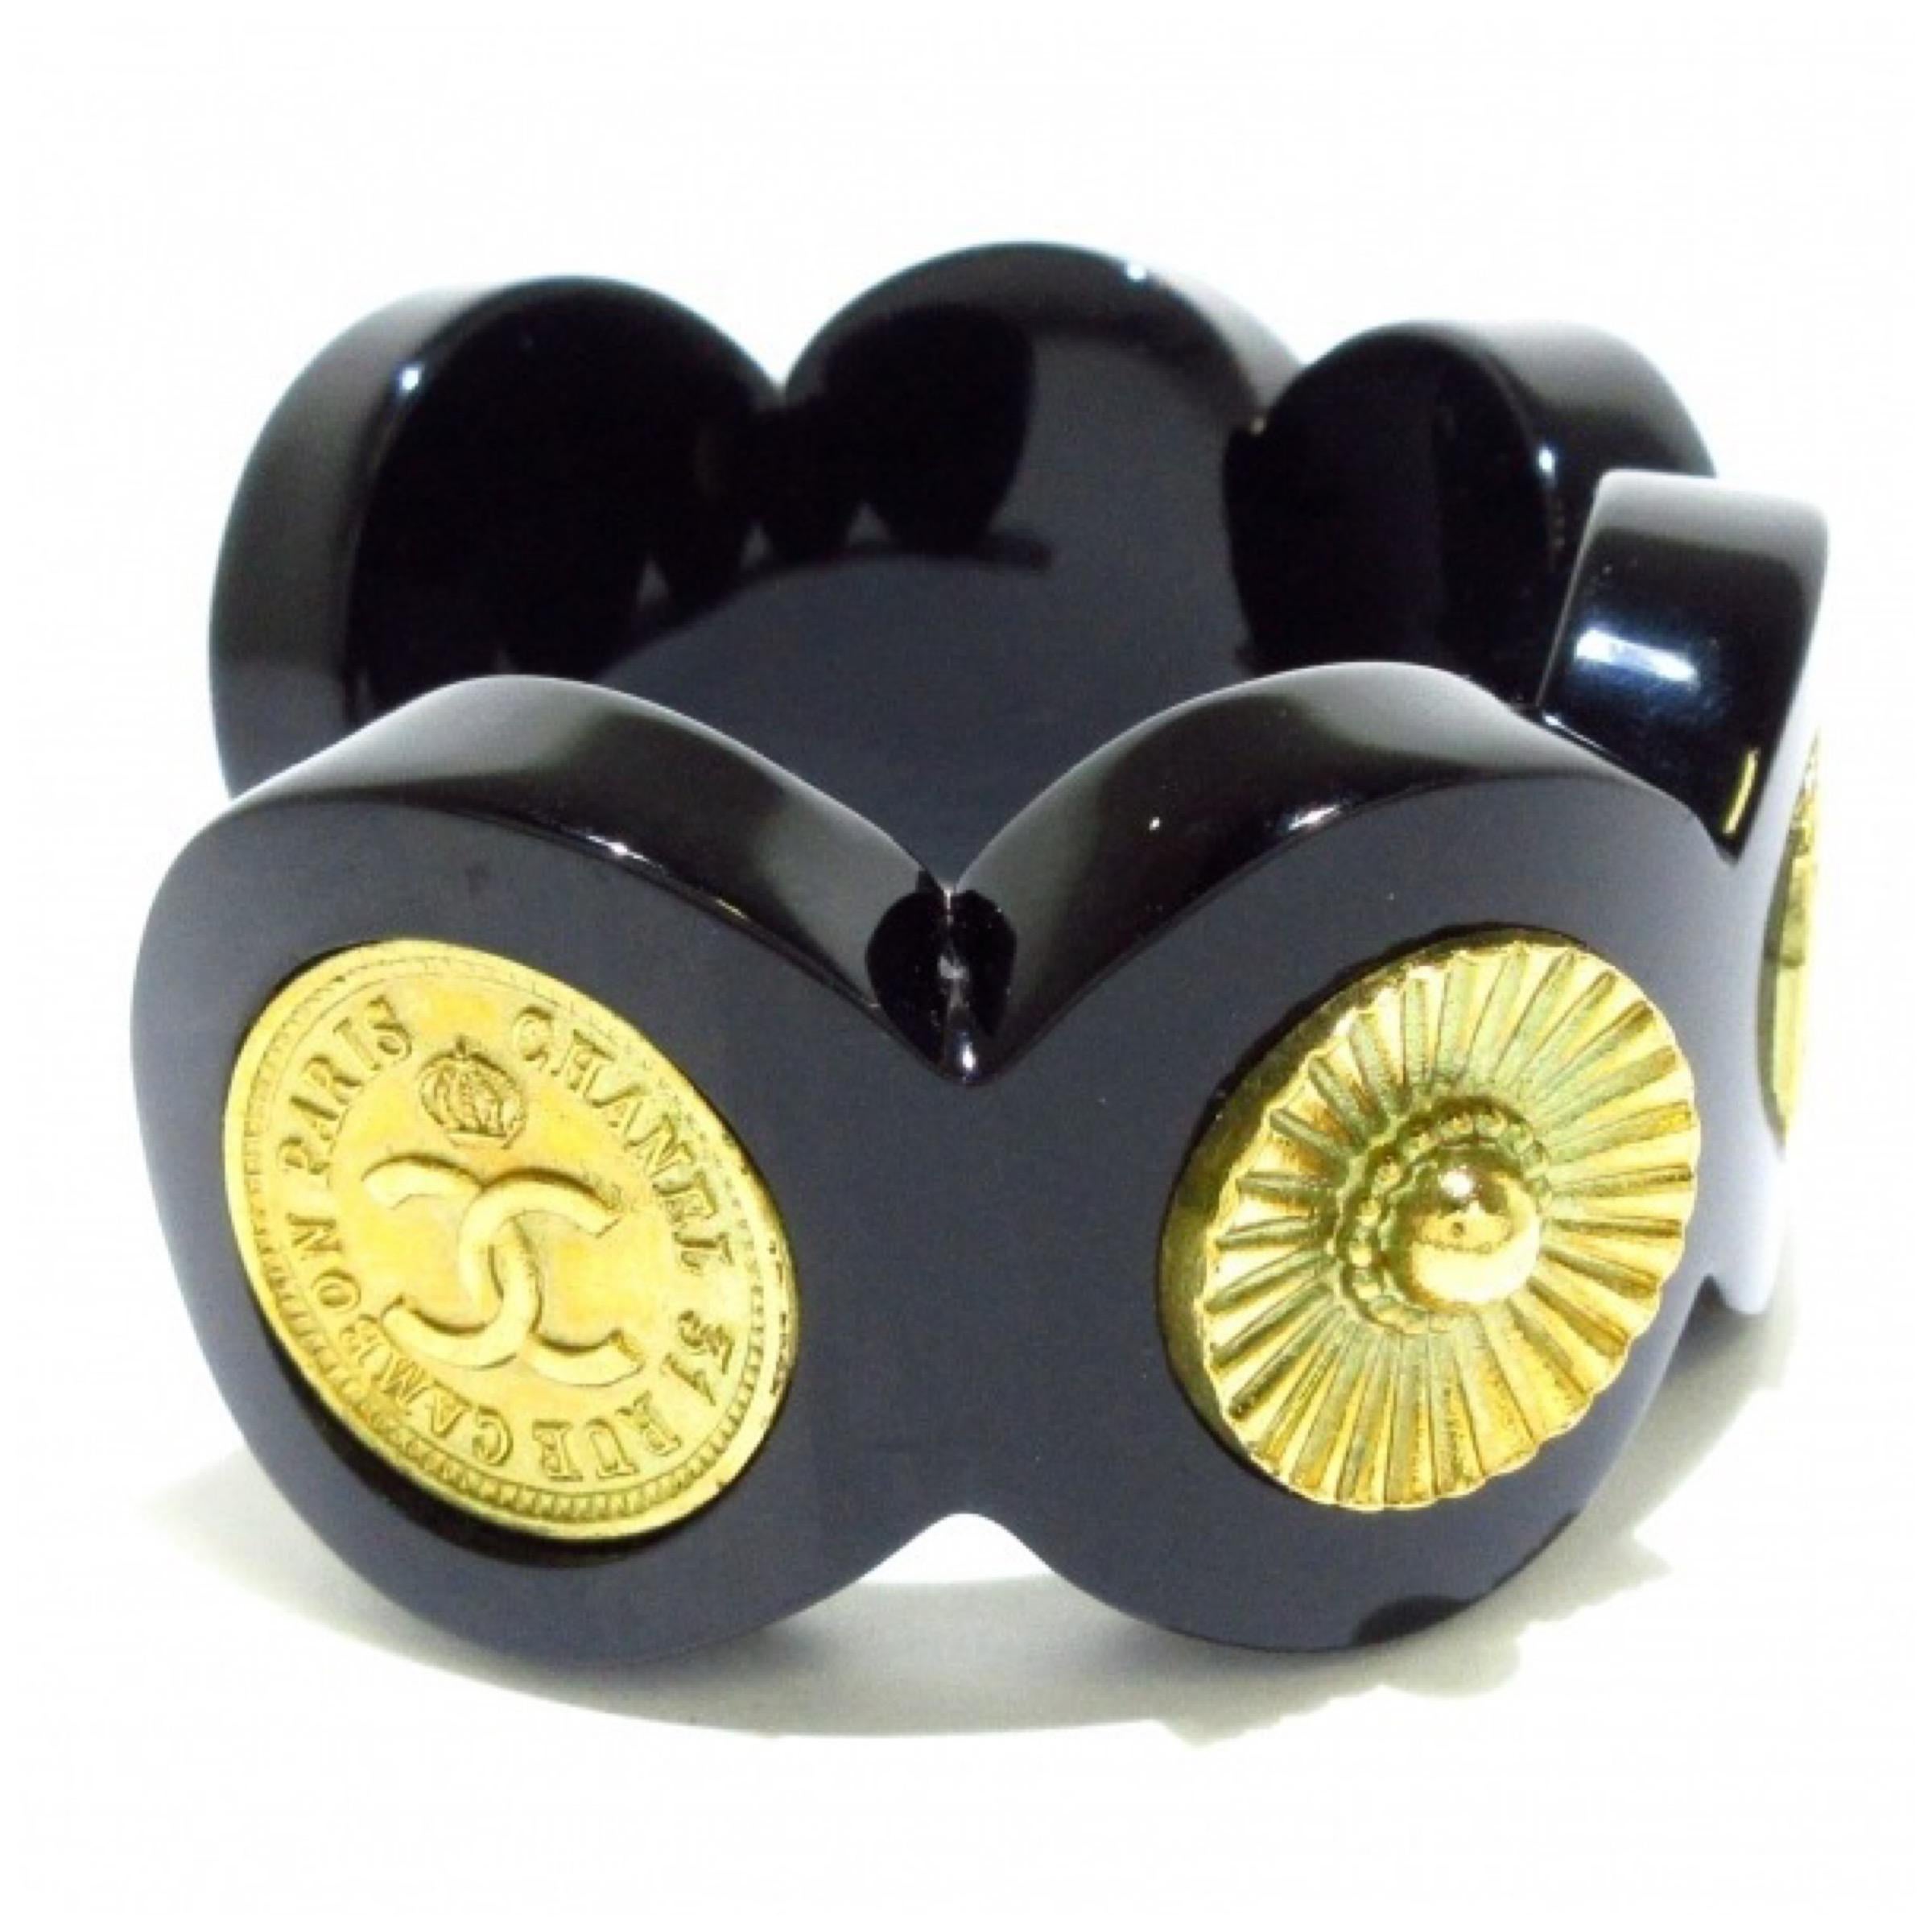 Vintage Chanel black resin cuff bracelet featuring six Chanel’s motifs including a very rare CoCo elephant coin. Stamped CHANEL 28 made in France. Inner circumference measures approximately 16 cm. Comes with box.

Condition: Very good vintage